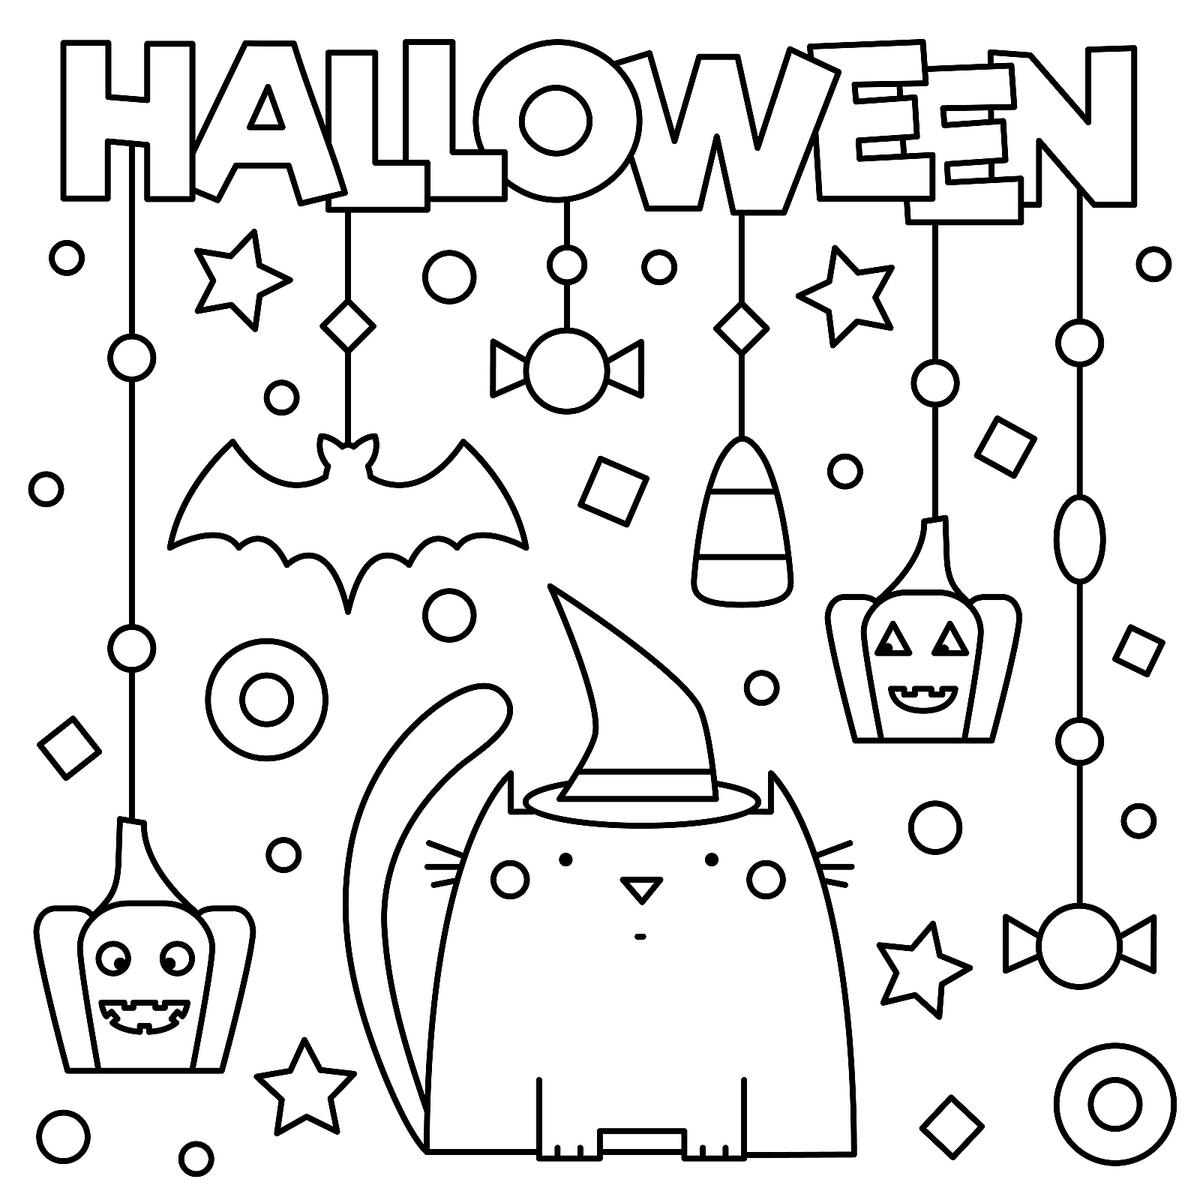 Free Kids Halloween Coloring Pages For To